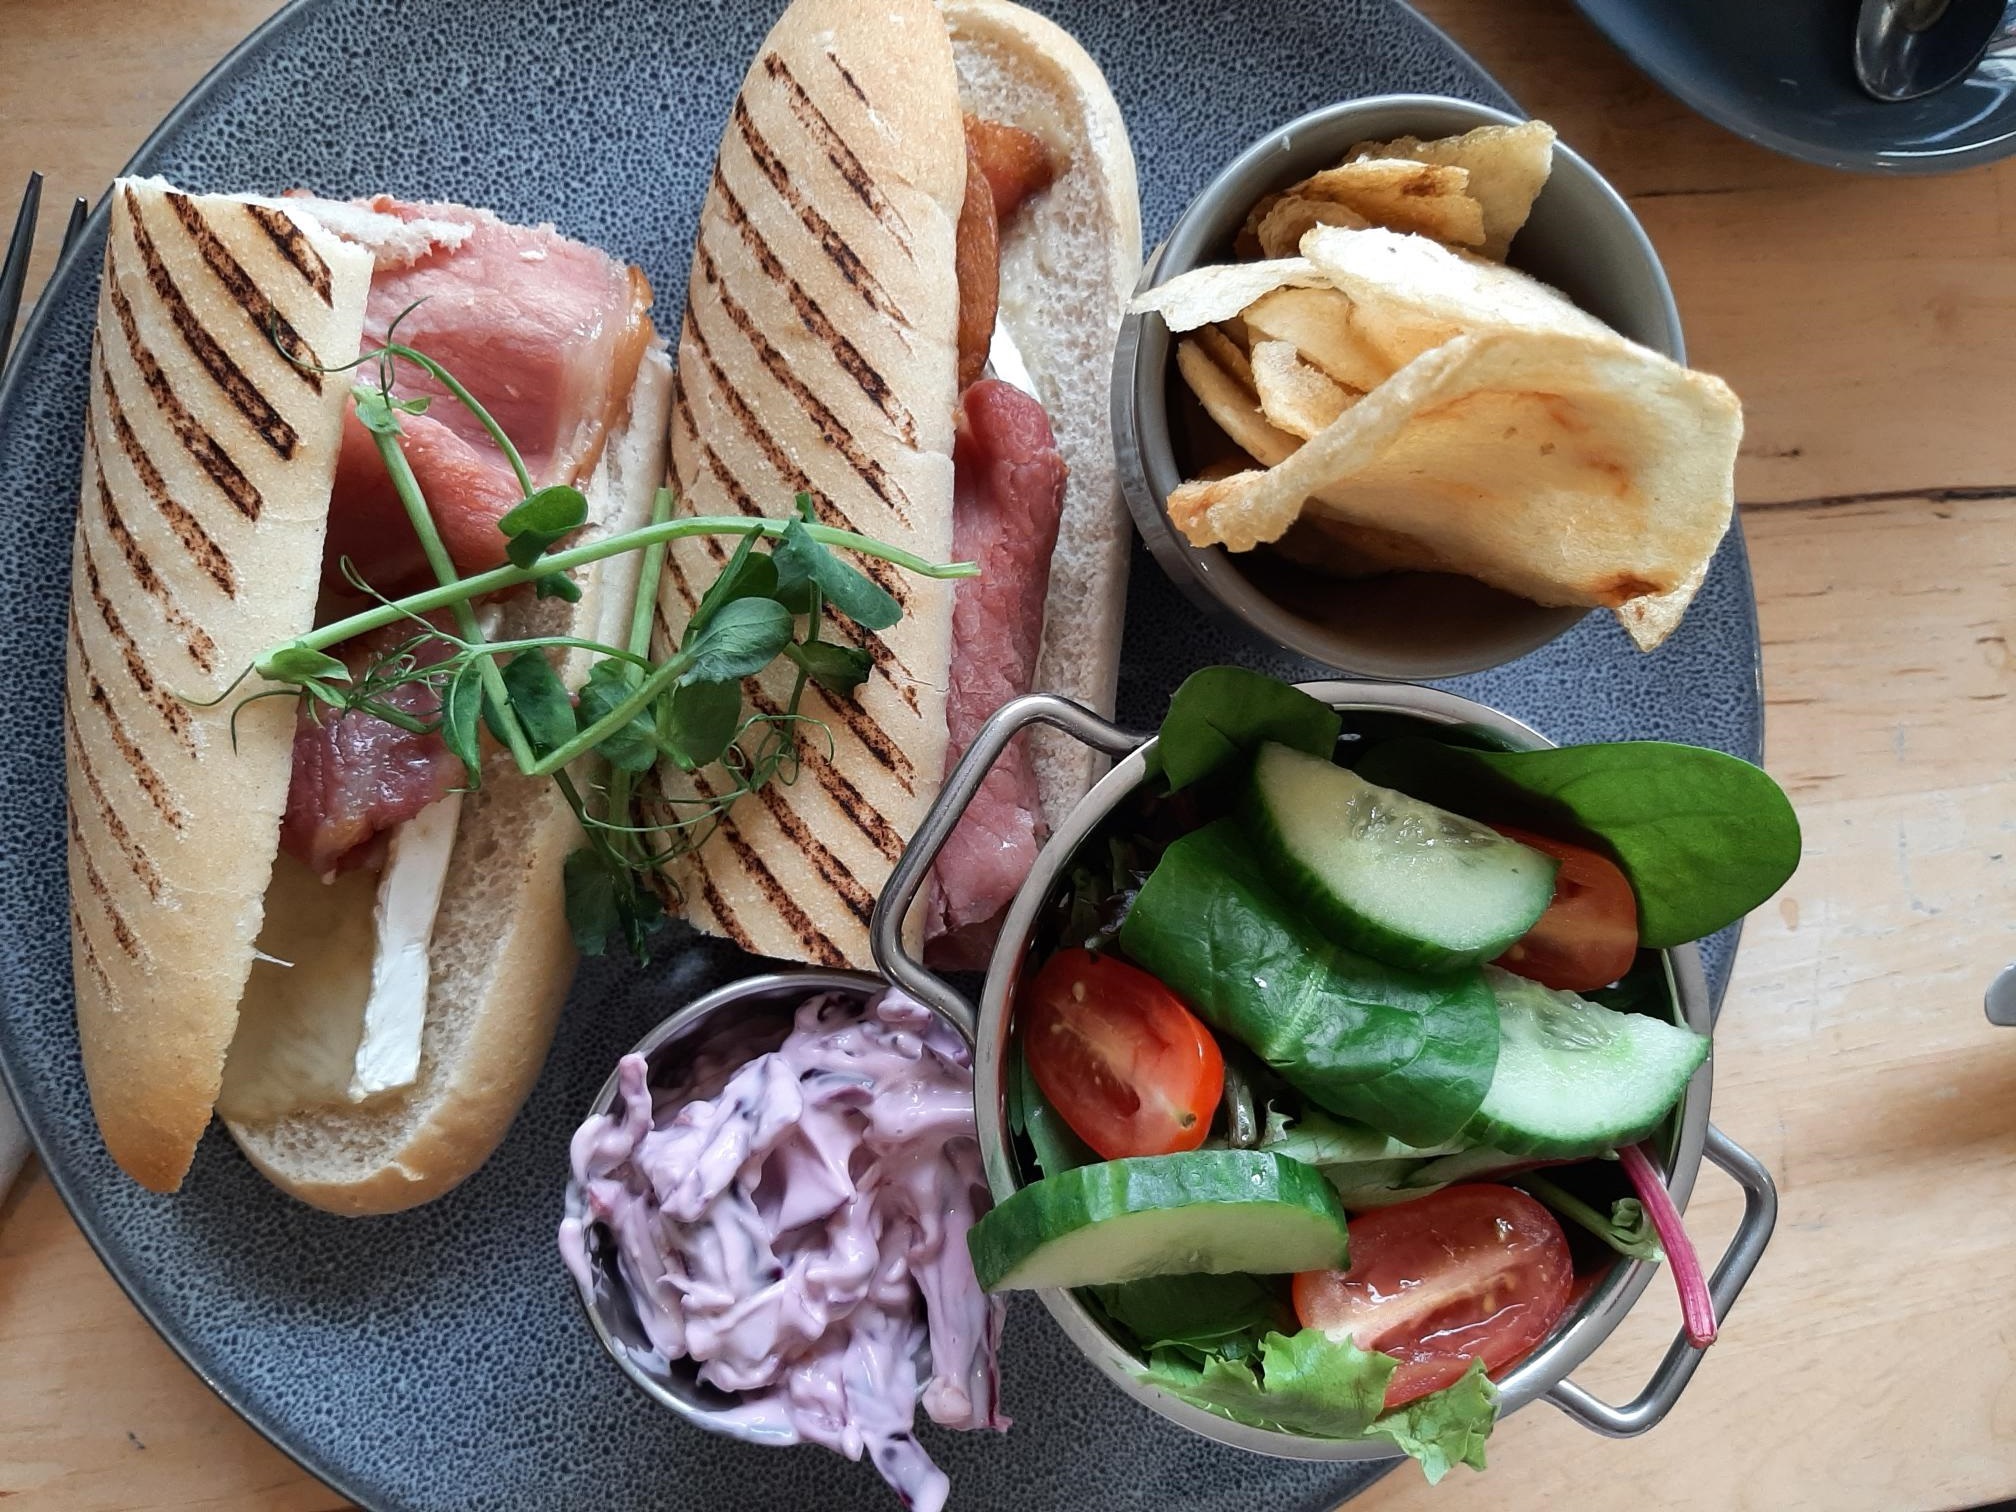 The bacon and brie panini at The Pantry on Millgate, Thirsk